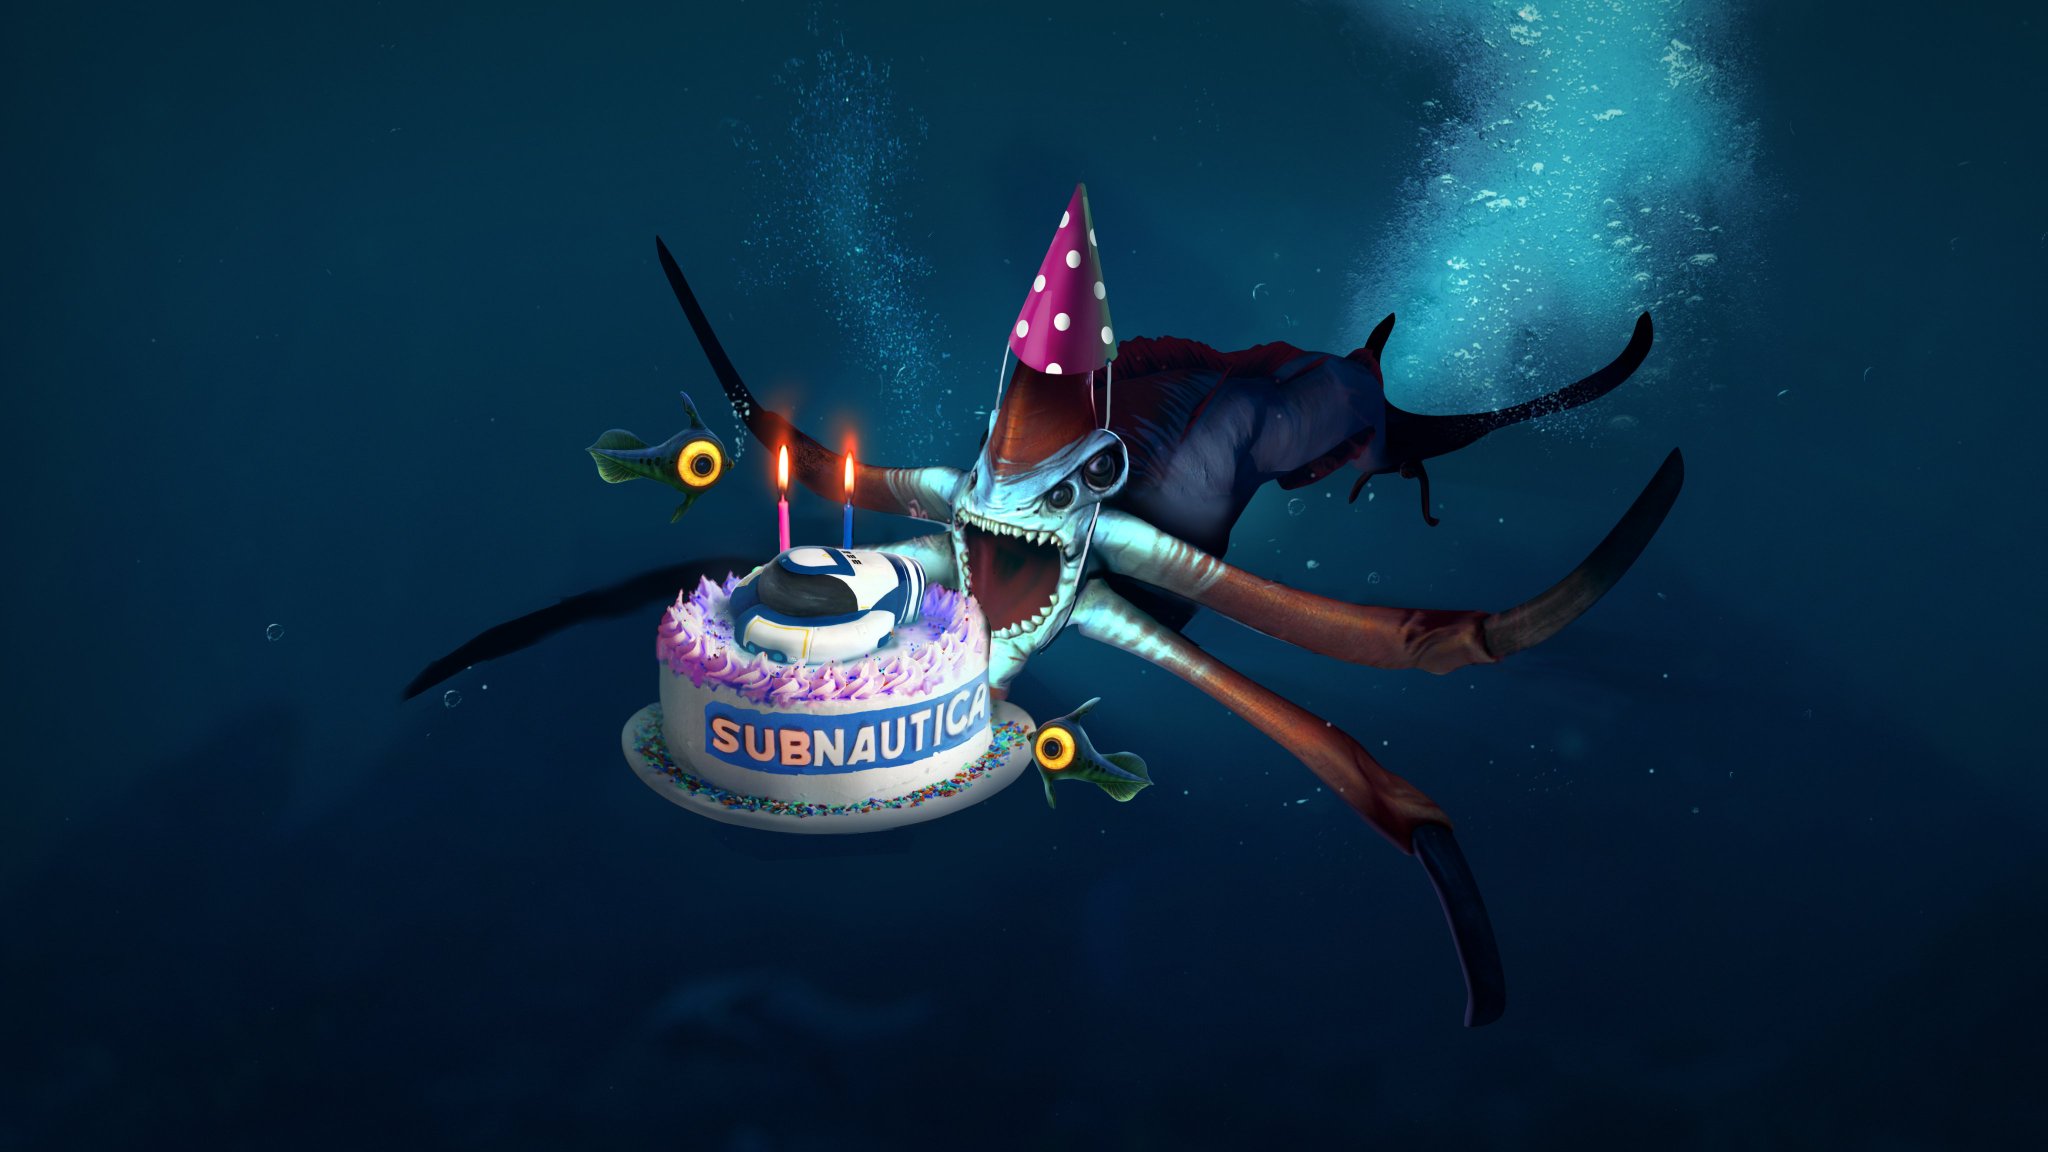 Unknown Worlds on Twitter: "Do the terrible twos count if you've always  been a terror from the deep? Happy 2nd birthday, @Subnautica! 🥳🎉  https://t.co/LeUVNNgVMc" / Twitter